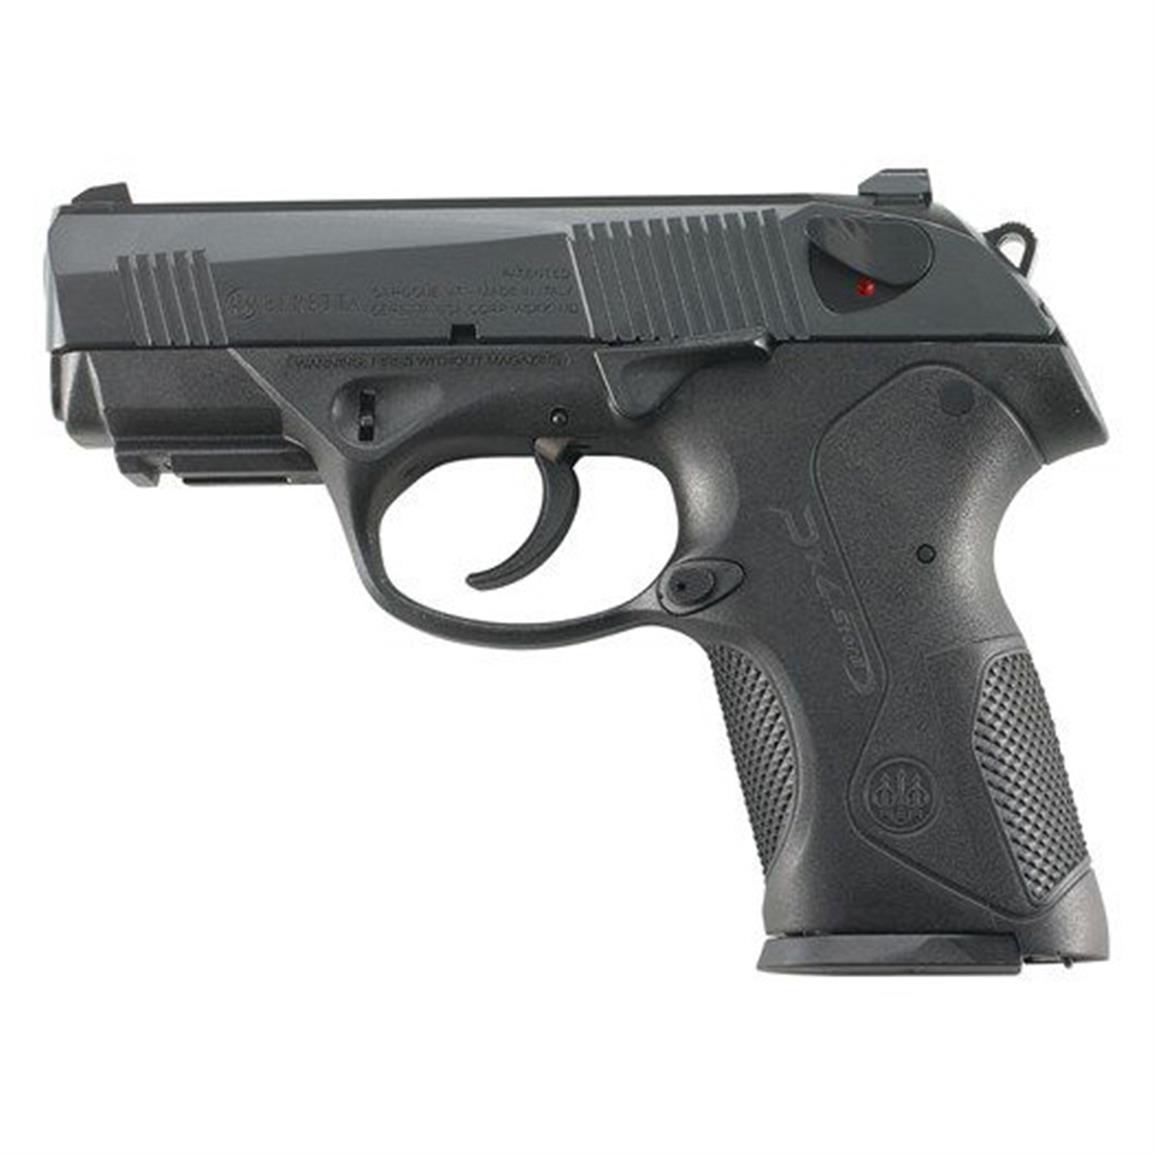 sold-beretta-px4-storm-compact-carry